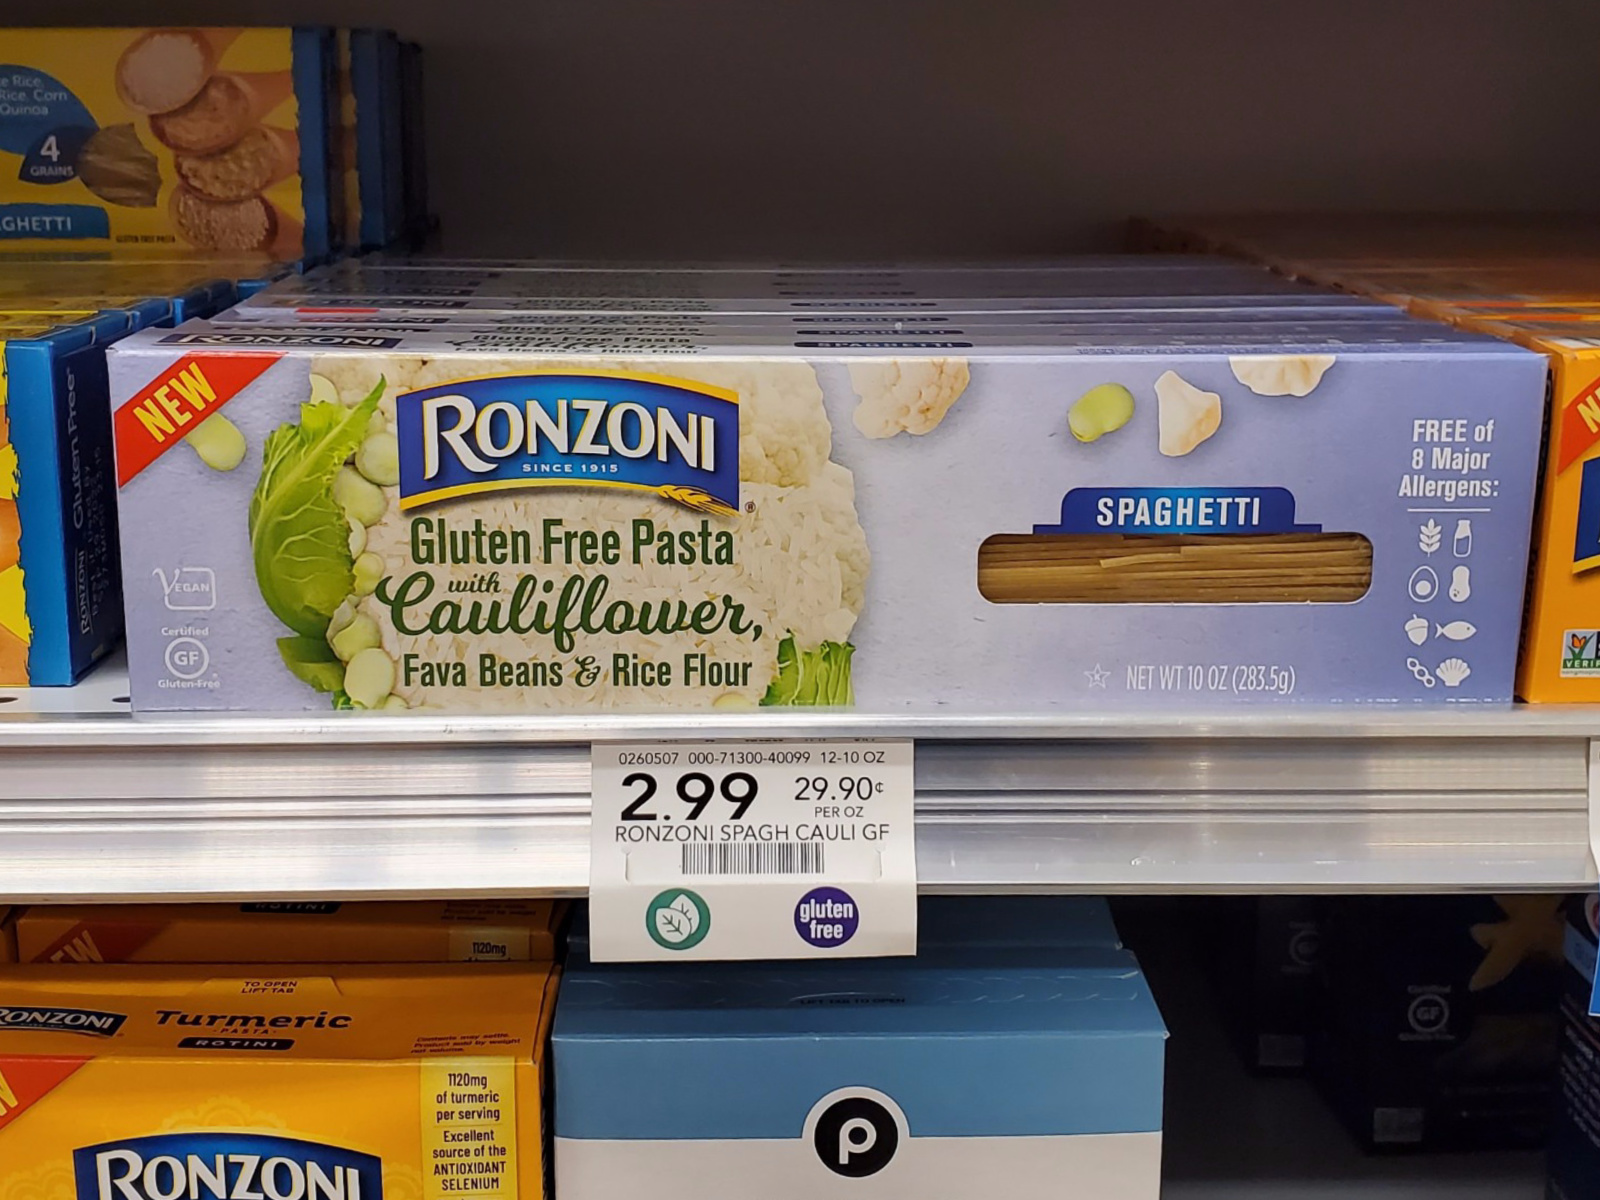 Save On Ronzoni At Publix & Try This Recipe For Ronzoni Cauliflower Penne with Spicy Sausage Ragu on I Heart Publix 1